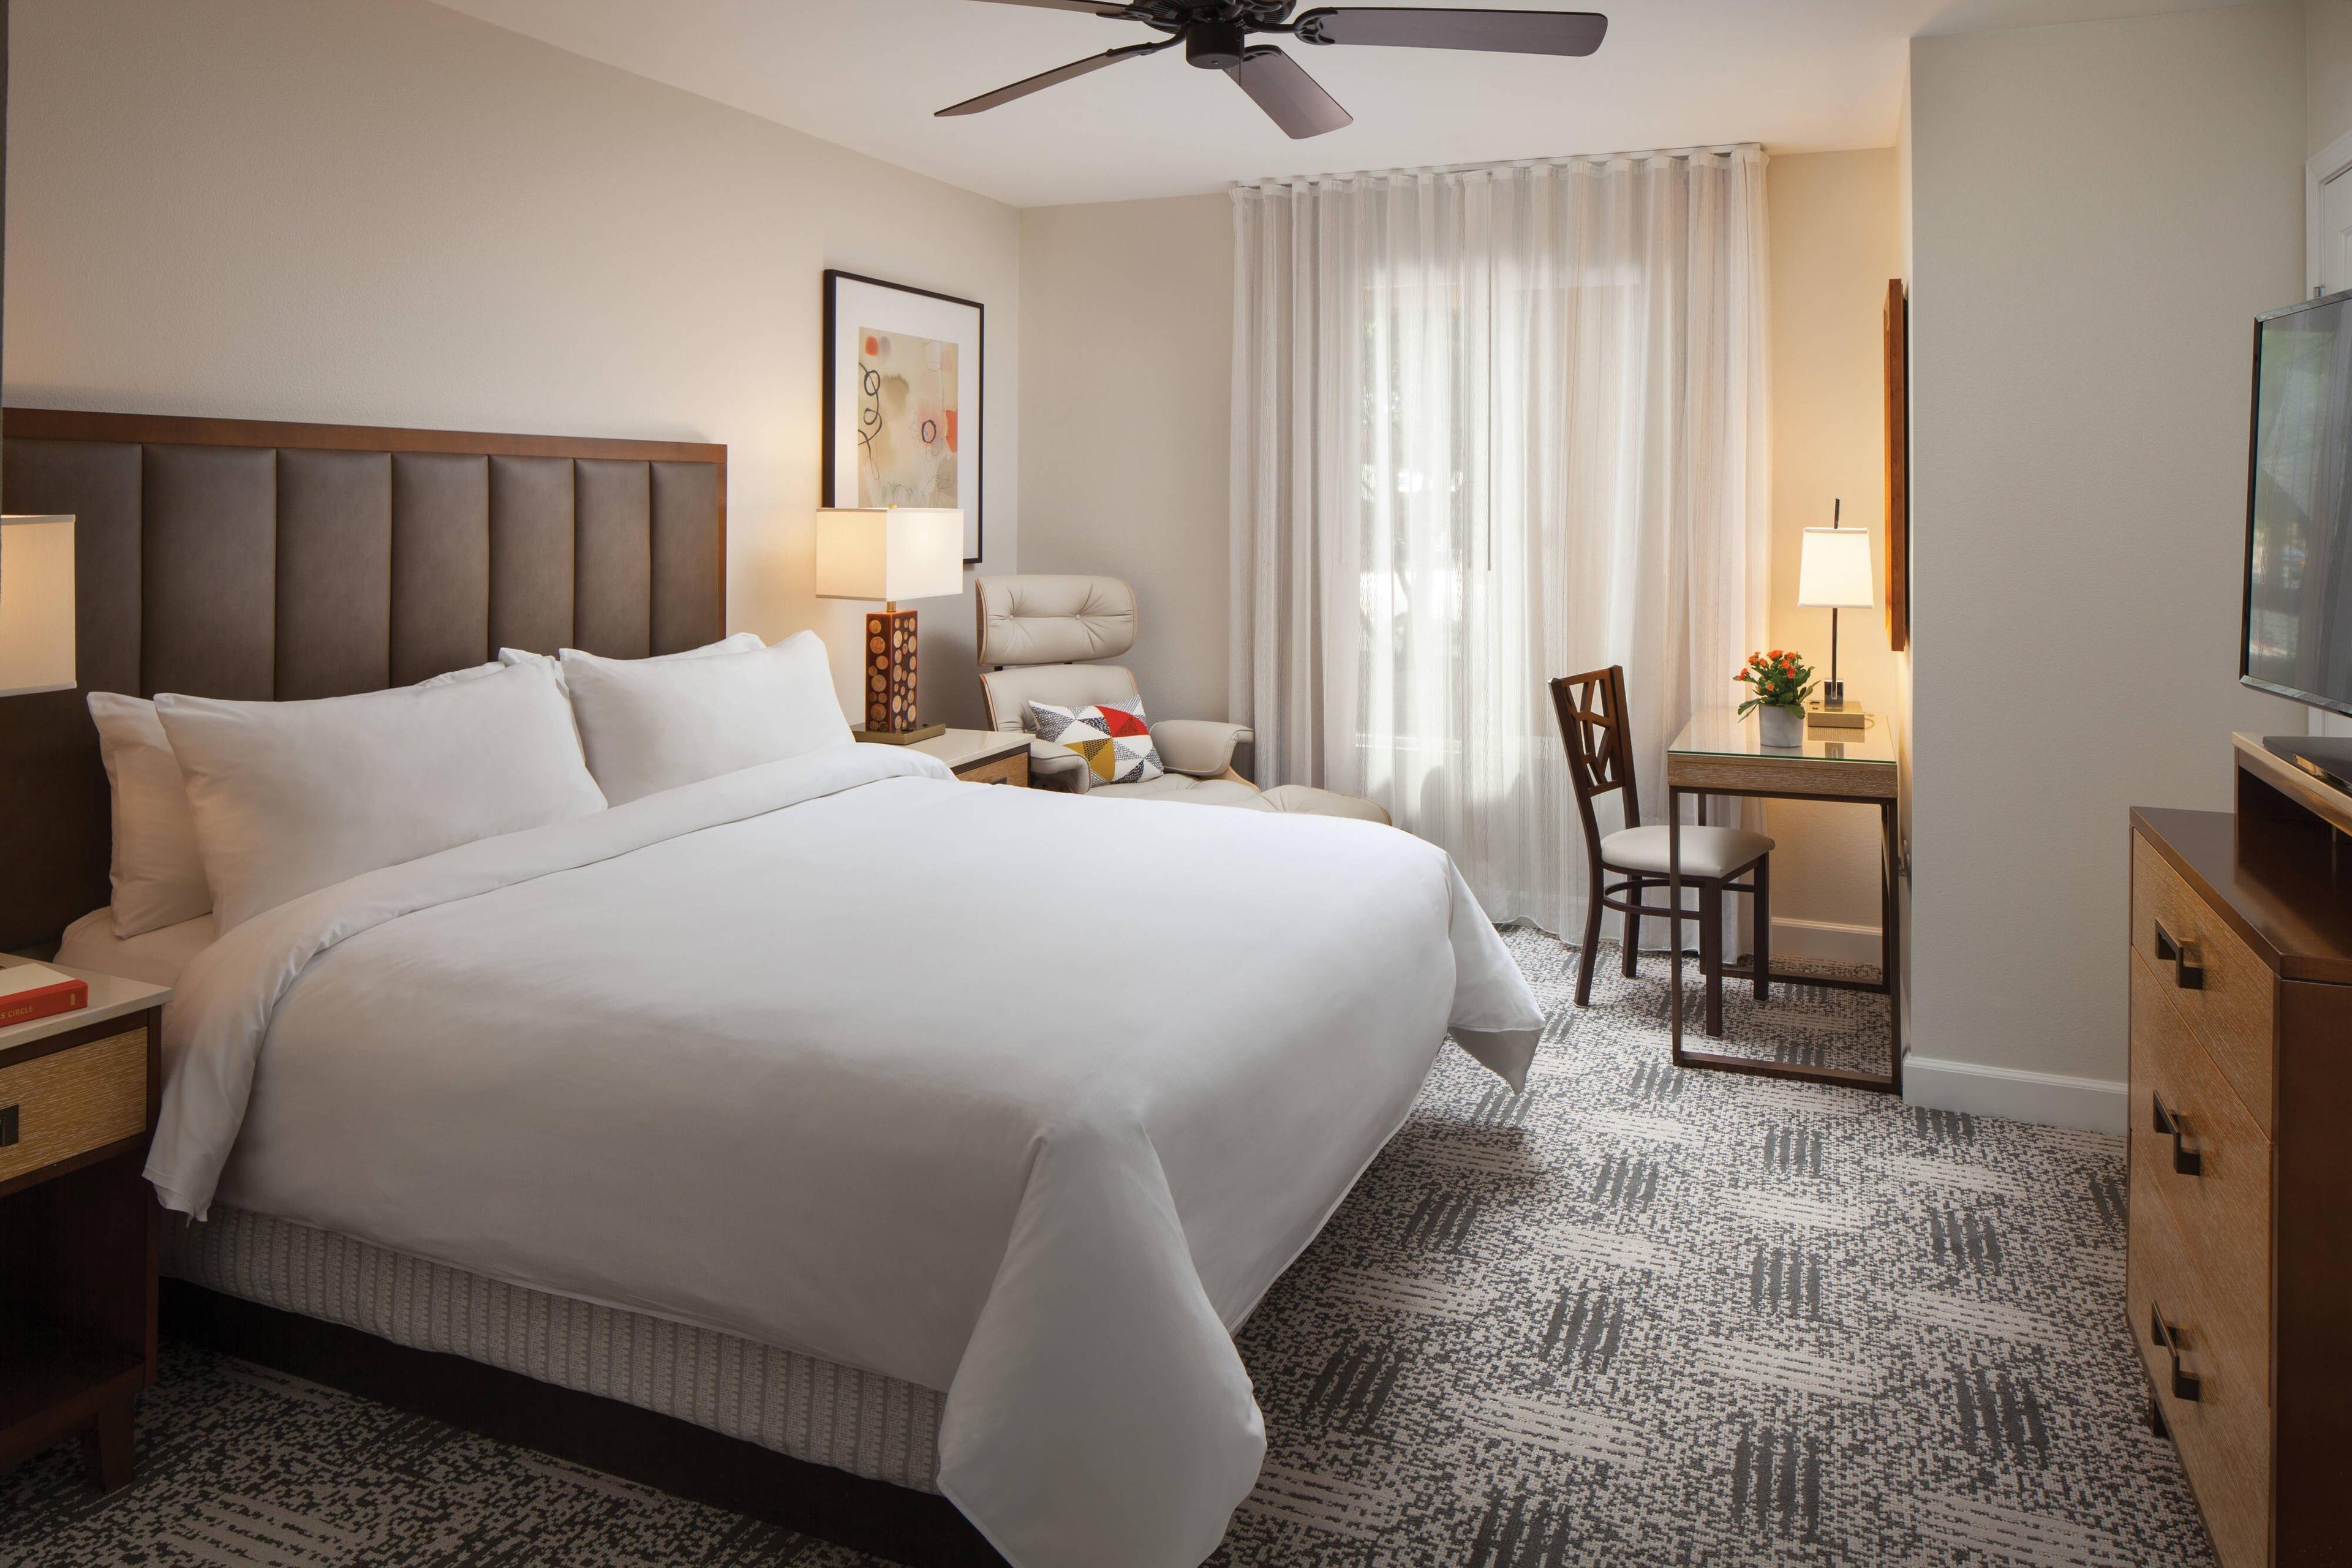 Relax and unwind in the comfortable master bedroom with a king-size bed and a private bath.